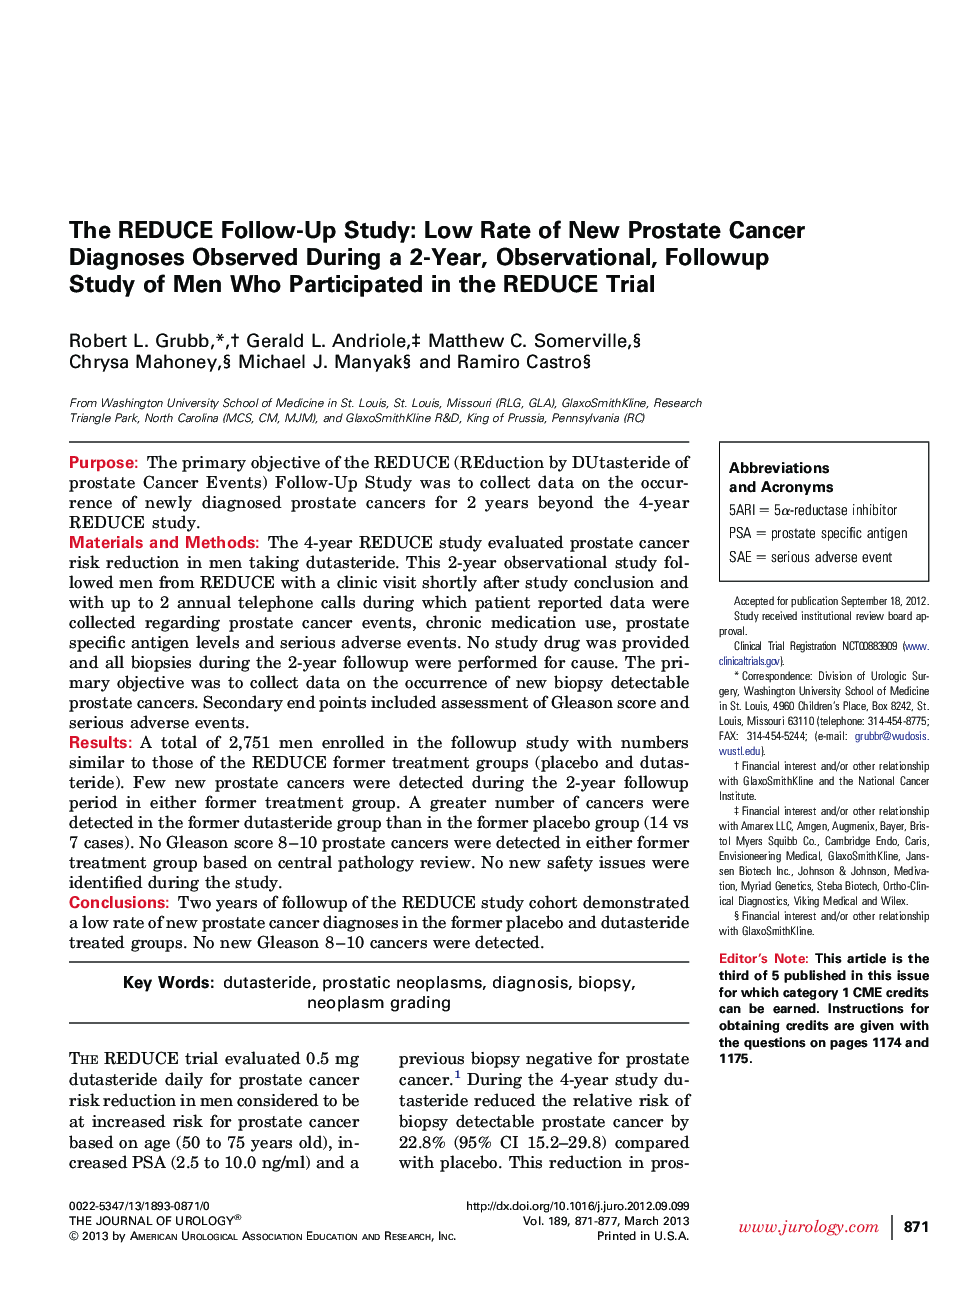 The REDUCE Follow-Up Study: Low Rate of New Prostate Cancer Diagnoses Observed During a 2-Year, Observational, Followup Study of Men Who Participated in the REDUCE Trial 